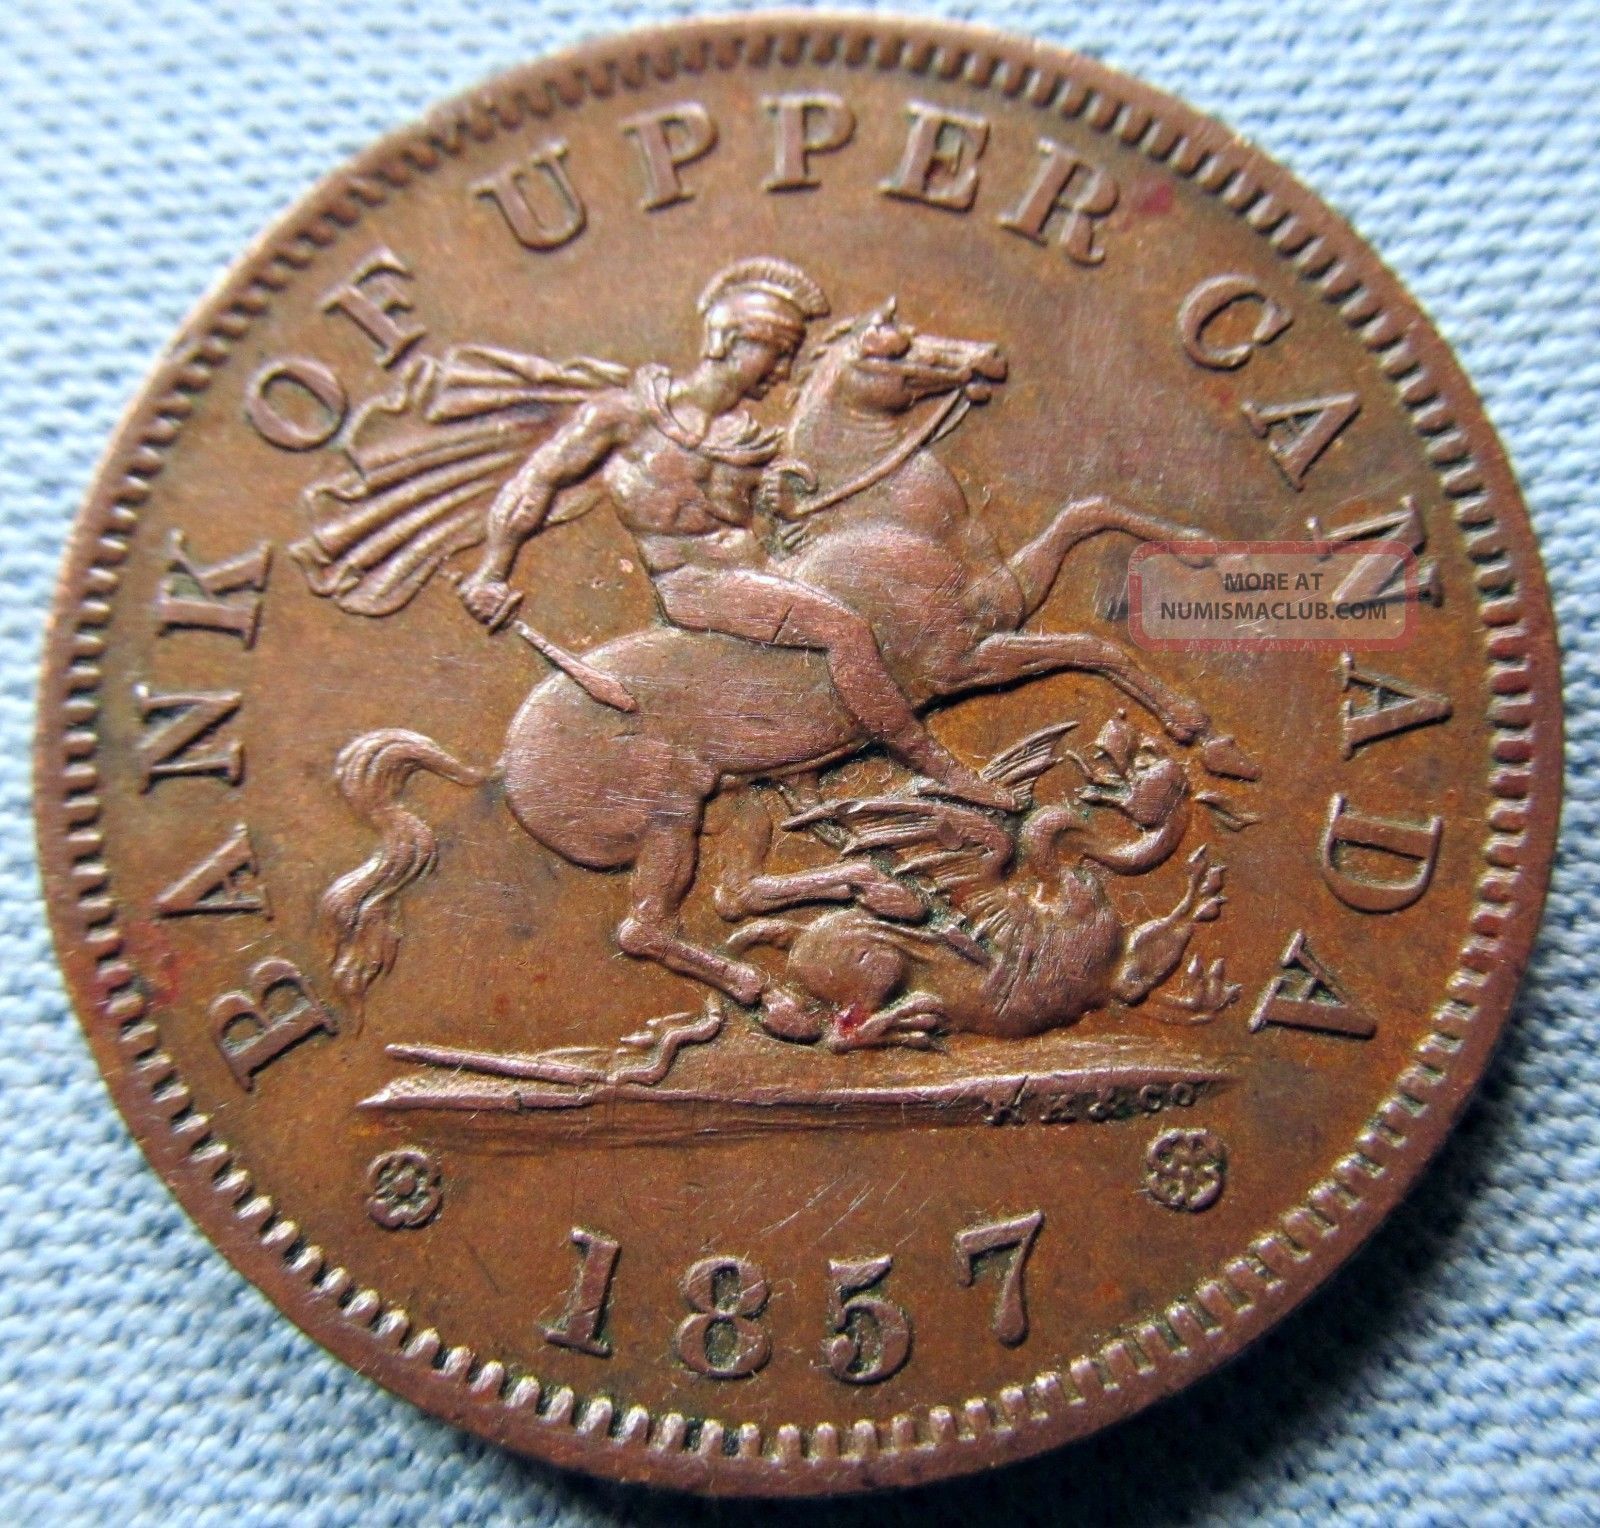 1857 Bank Of Upper Canada Province Of Canada One Penny Token Copper Coins: Canada photo